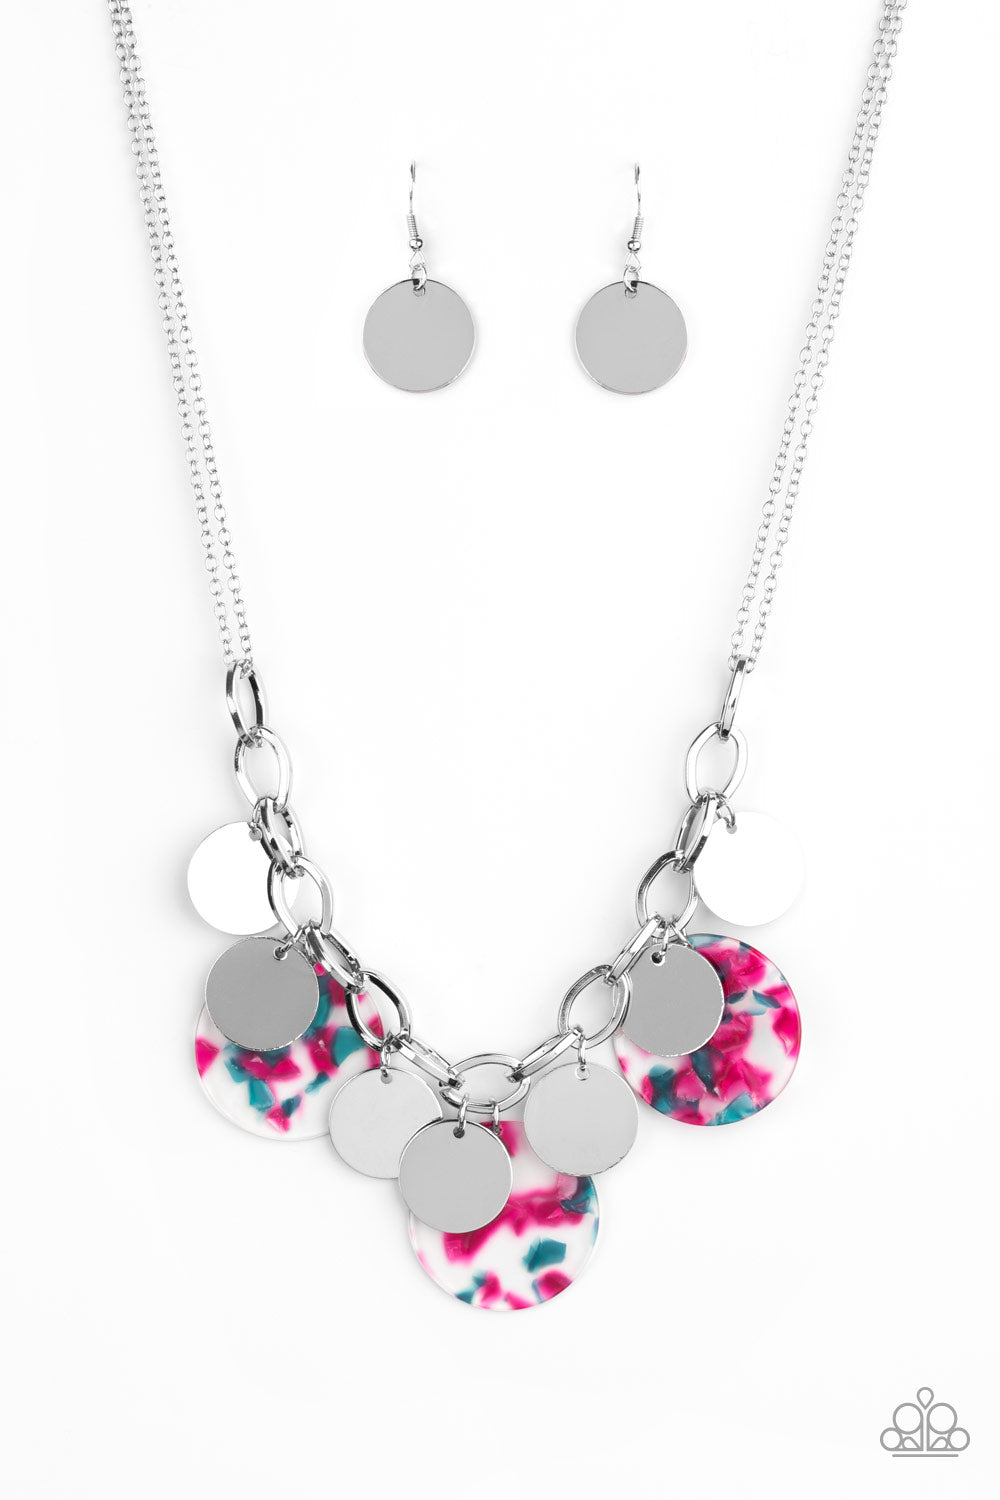 Paparazzi Confetti Confection - Pink Acrylic Necklace - A Finishing Touch 